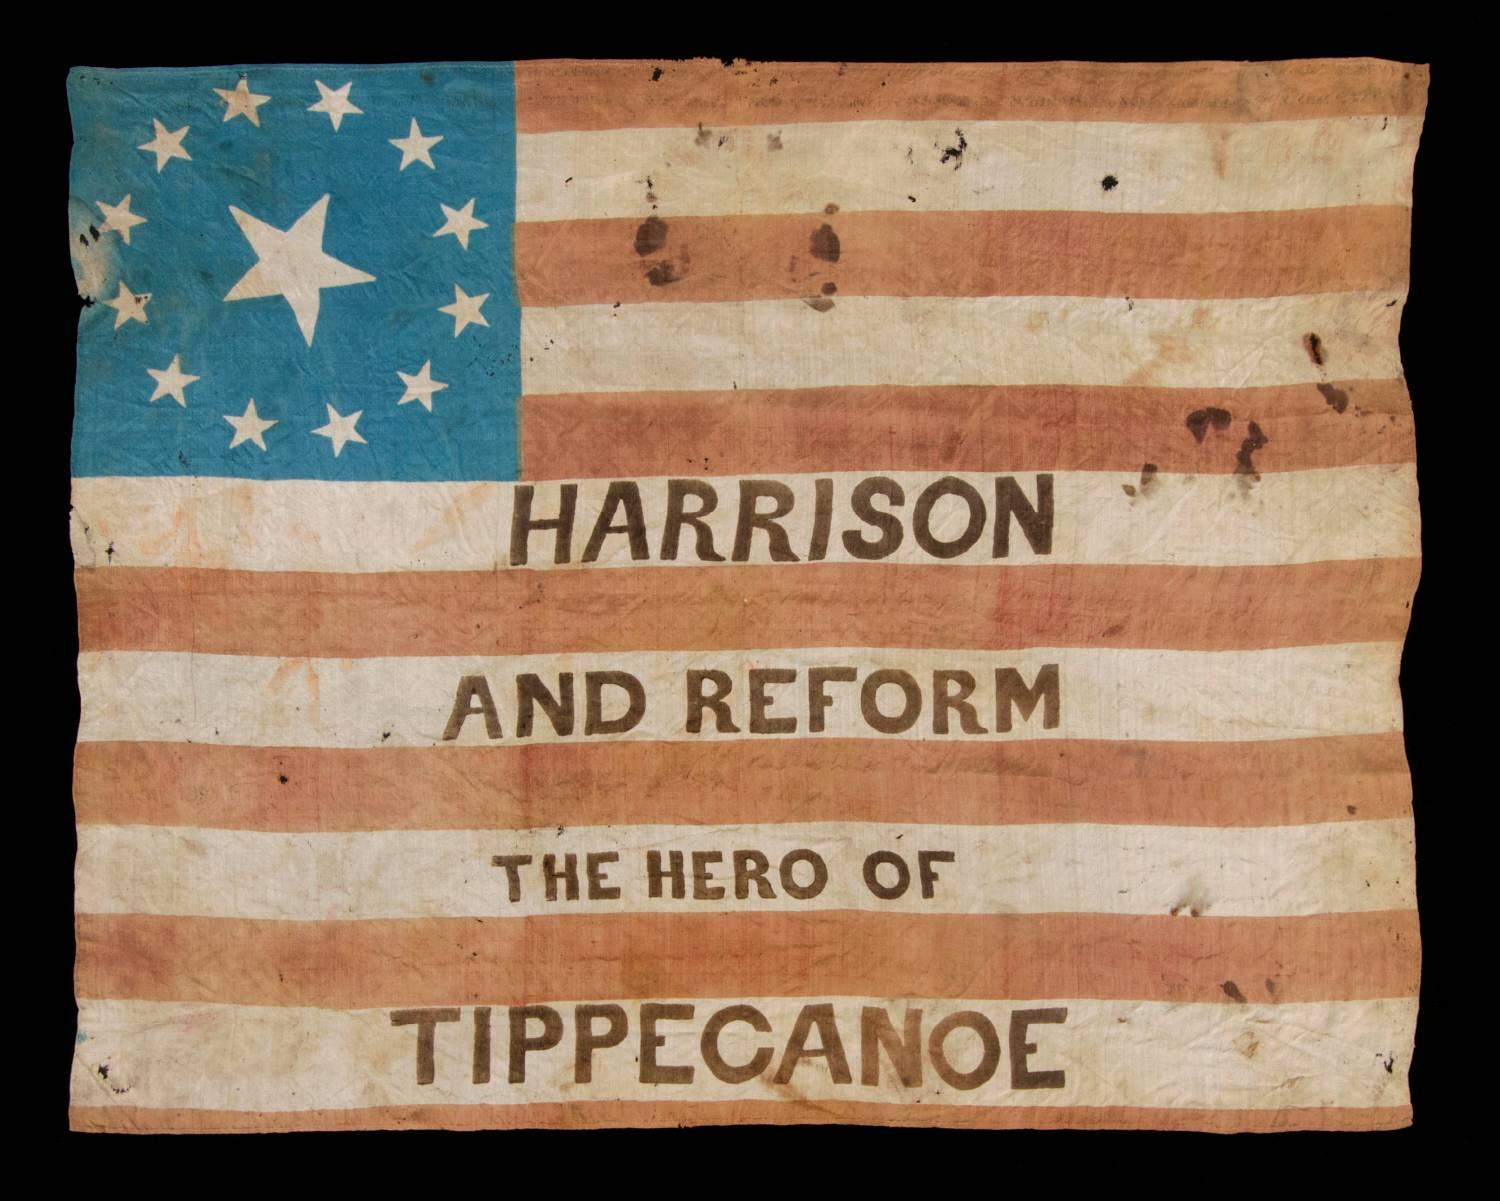 One of the earliest known parade flags: a rare cexample from the 1840 presidential campaign of william henry harrison, with 13 stars in a 3rd maryland pattern, nickname and platform slogan:

The earliest printed flags known to exist, that can be